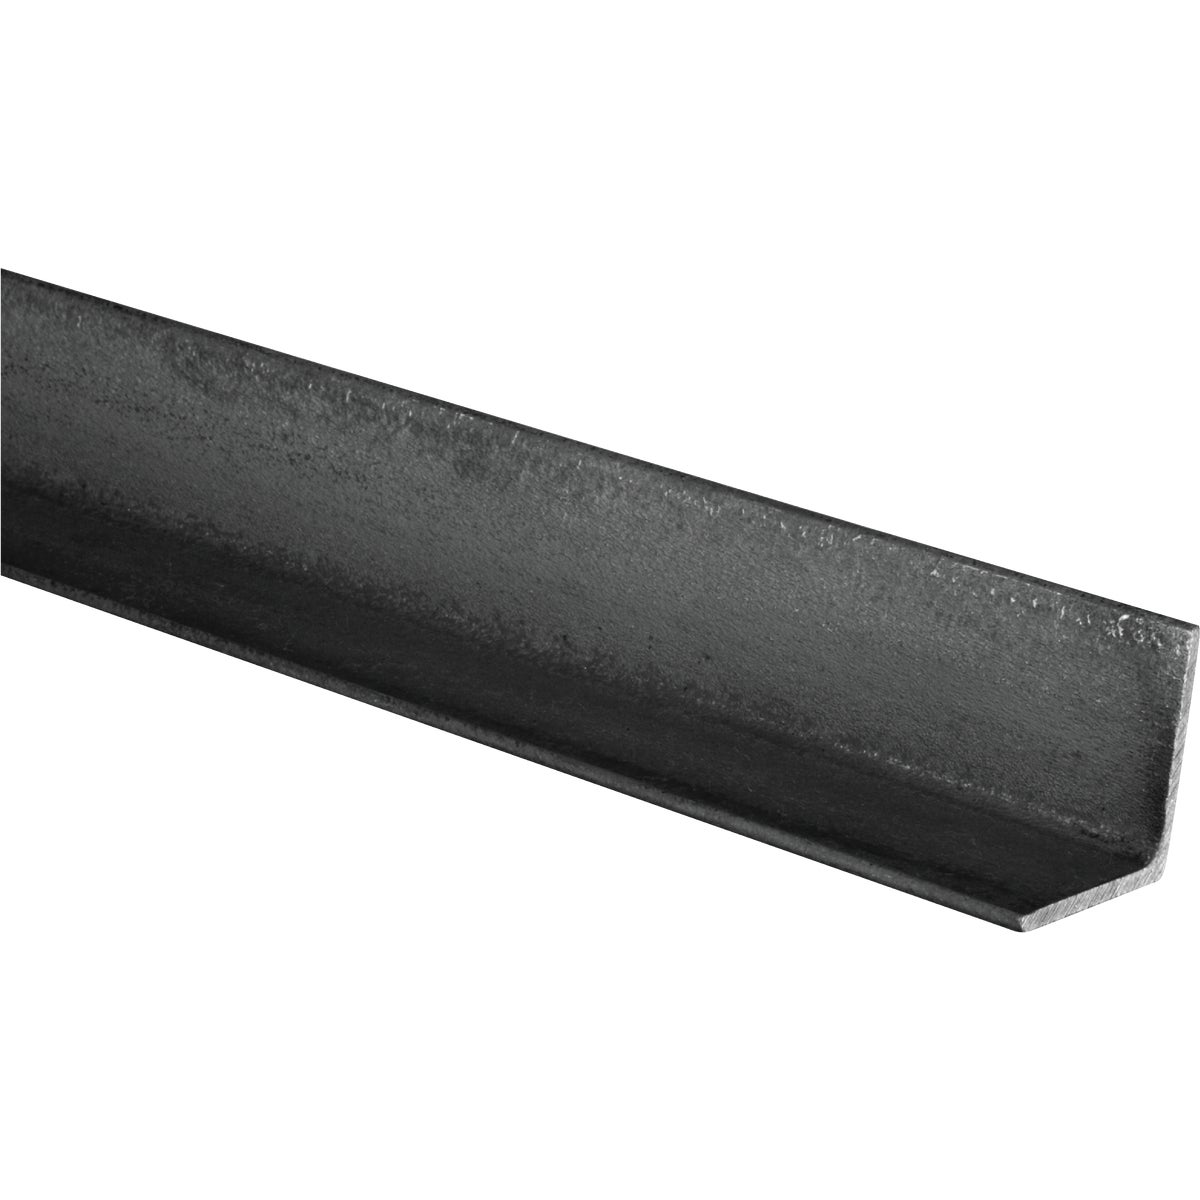 Hillman Steelworks 3/4 In. x 4 Ft., 1/8 In. Weldable Solid Angle